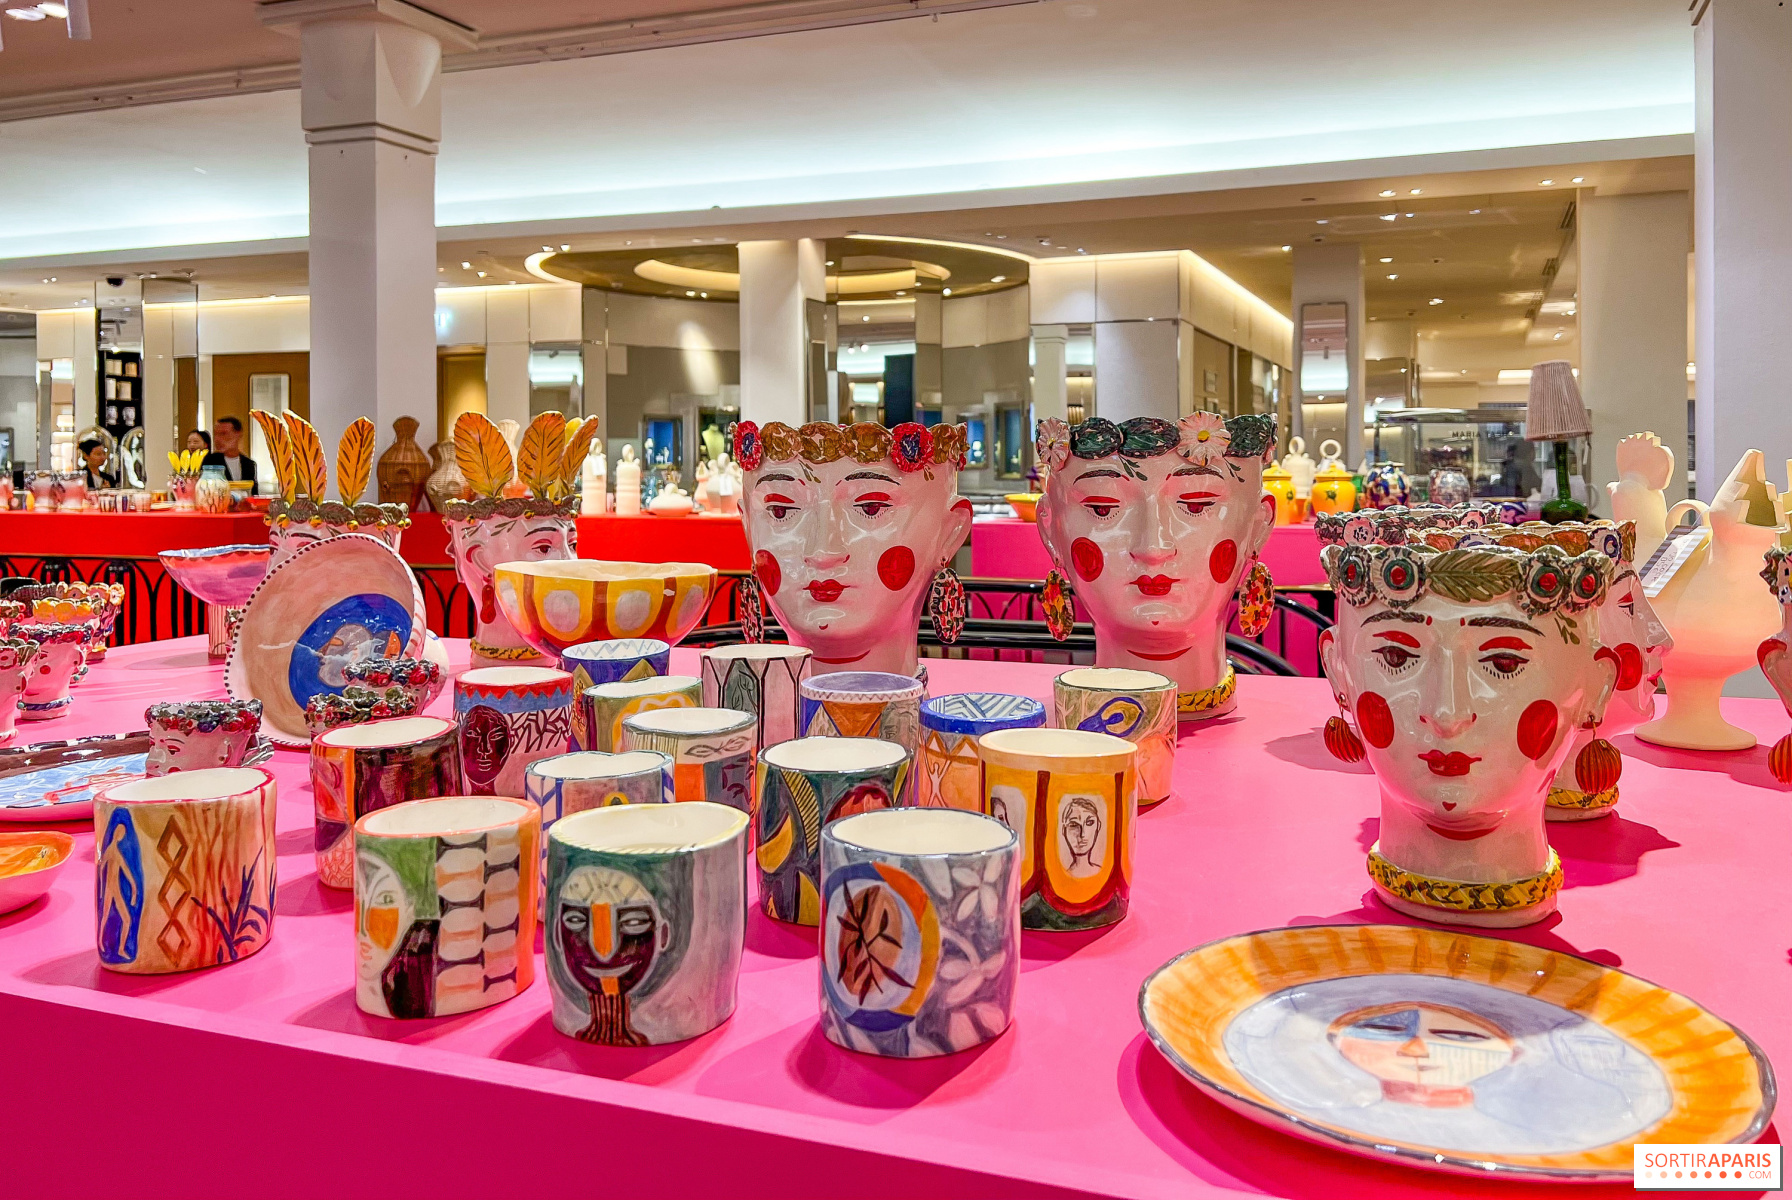 LET'S GO LOGO: THE NEW EXHIBITION AT LE BON MARCHE, YOU CANNOT MISS OUT